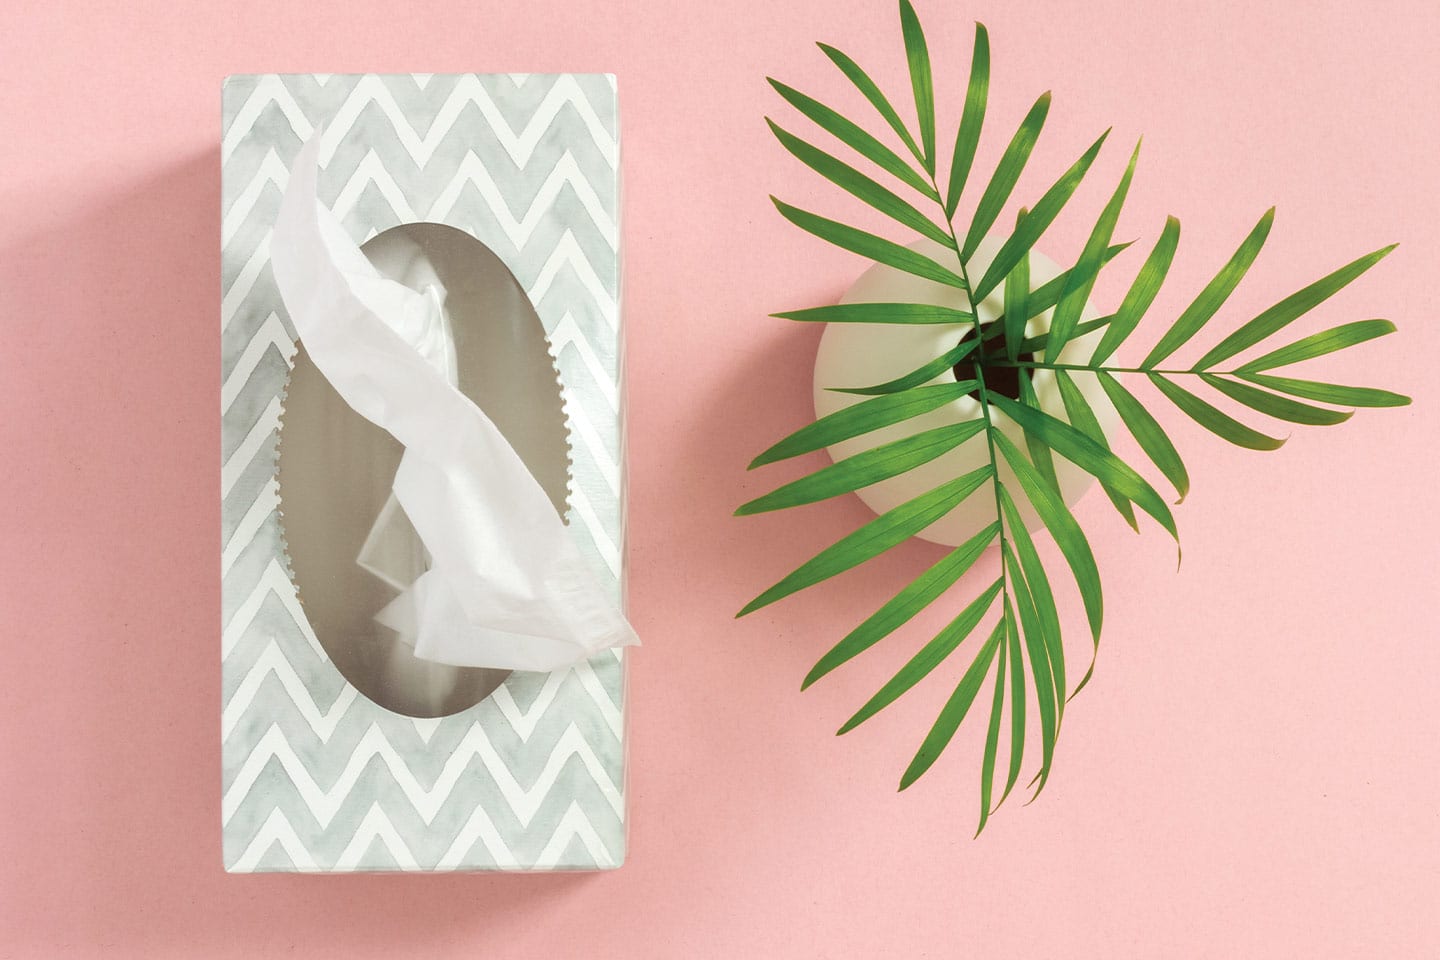 tissue box and plant on pink background